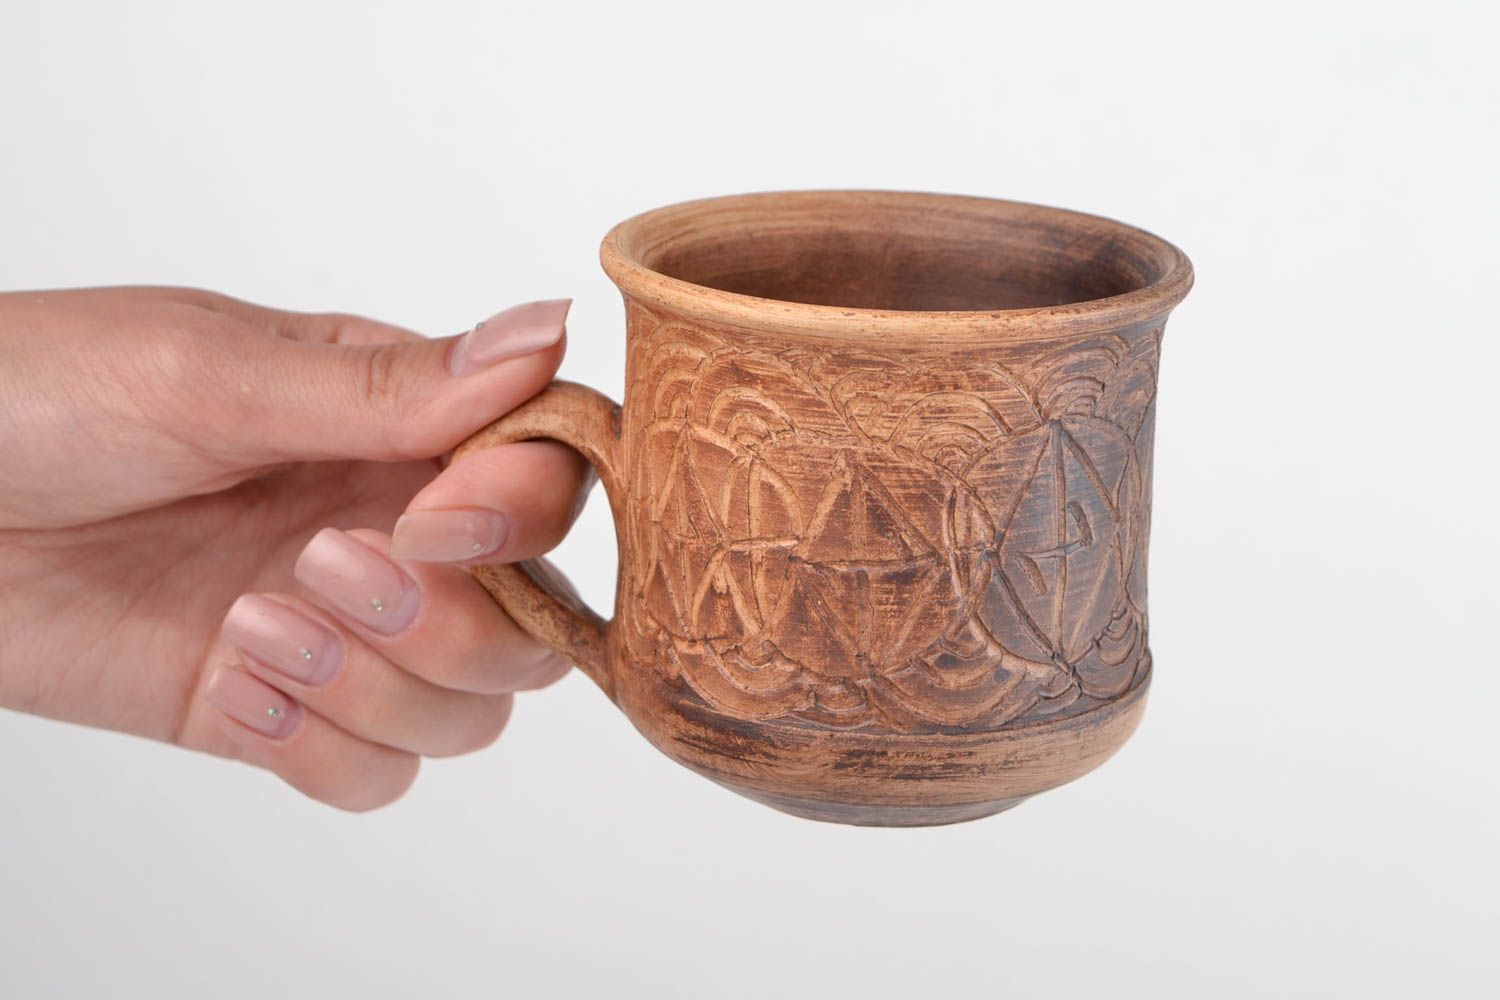 Medium size 5 oz clay cup with handle and rustic pattern photo 2